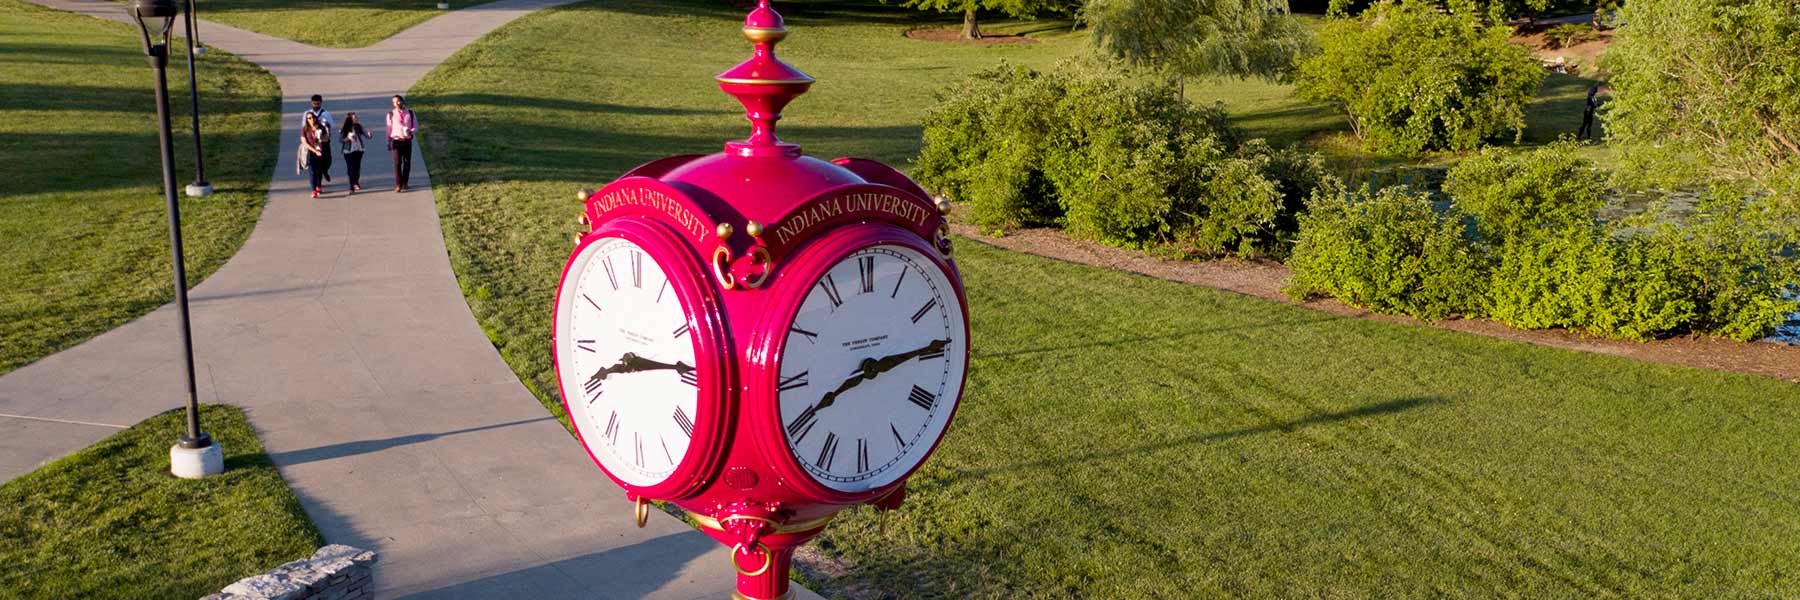 Decorative red clock on campus with students walking in background.